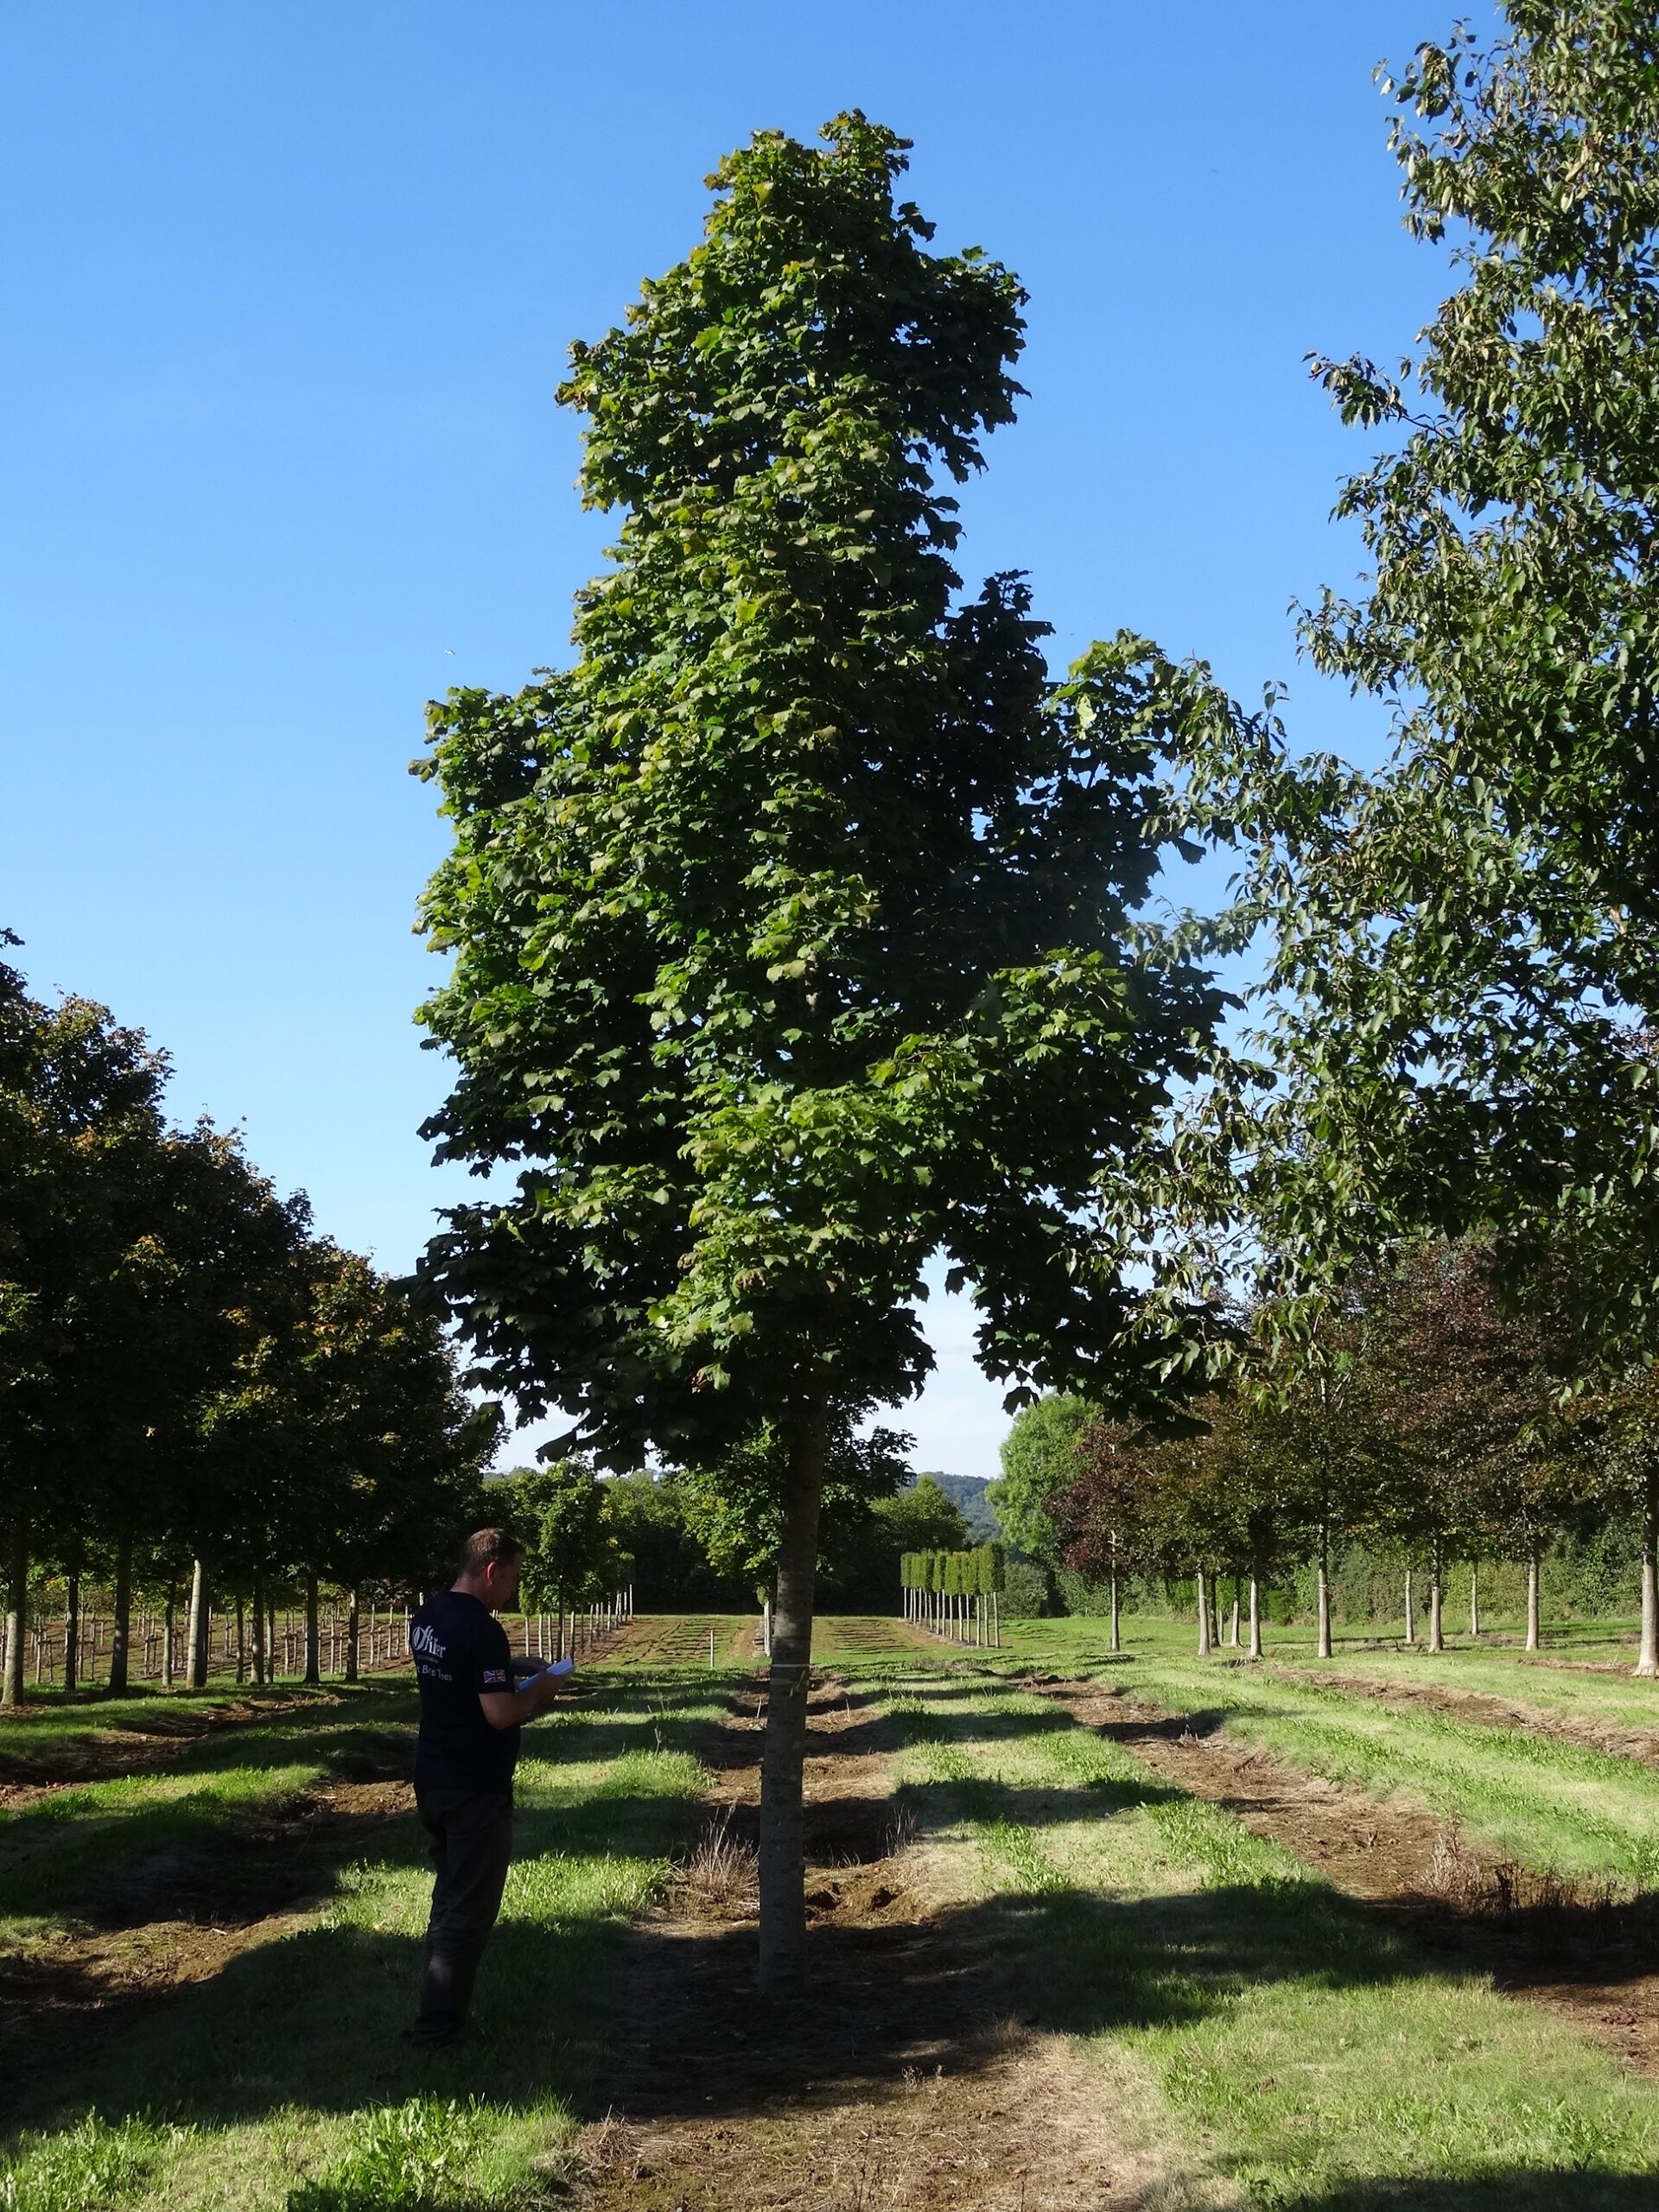 Acer platanoides Columnare super semi-mature trees growing in fields